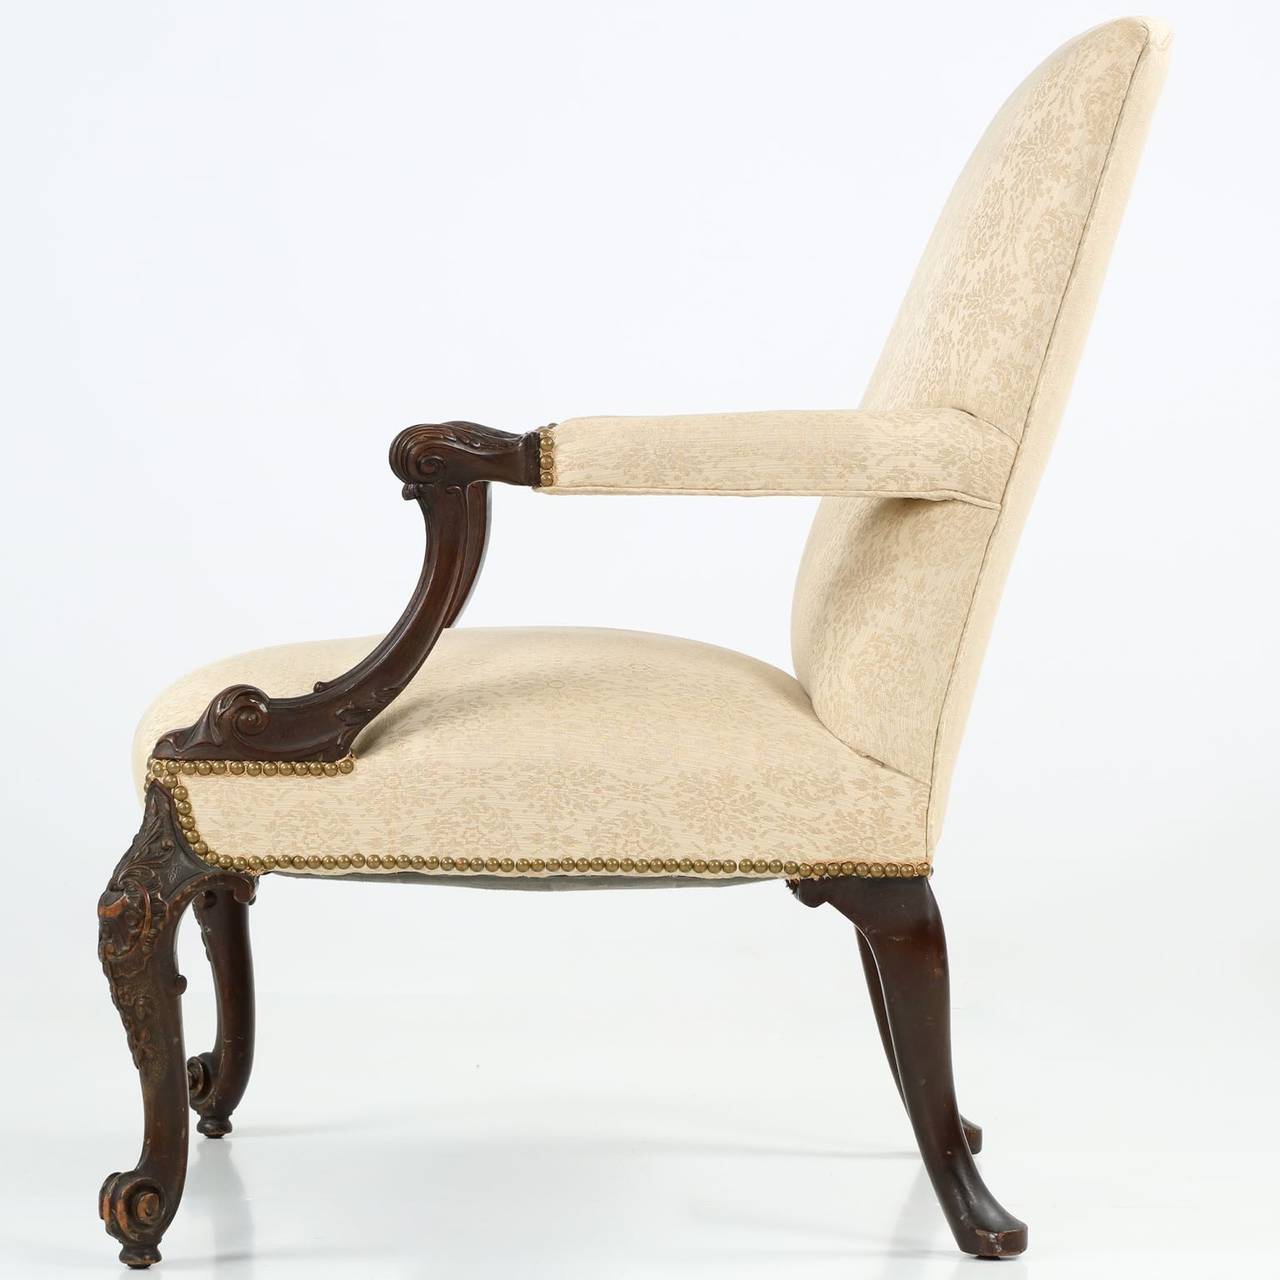 Carved English Chippendale Style Mahogany Open Arm Antique Chair, circa 1890